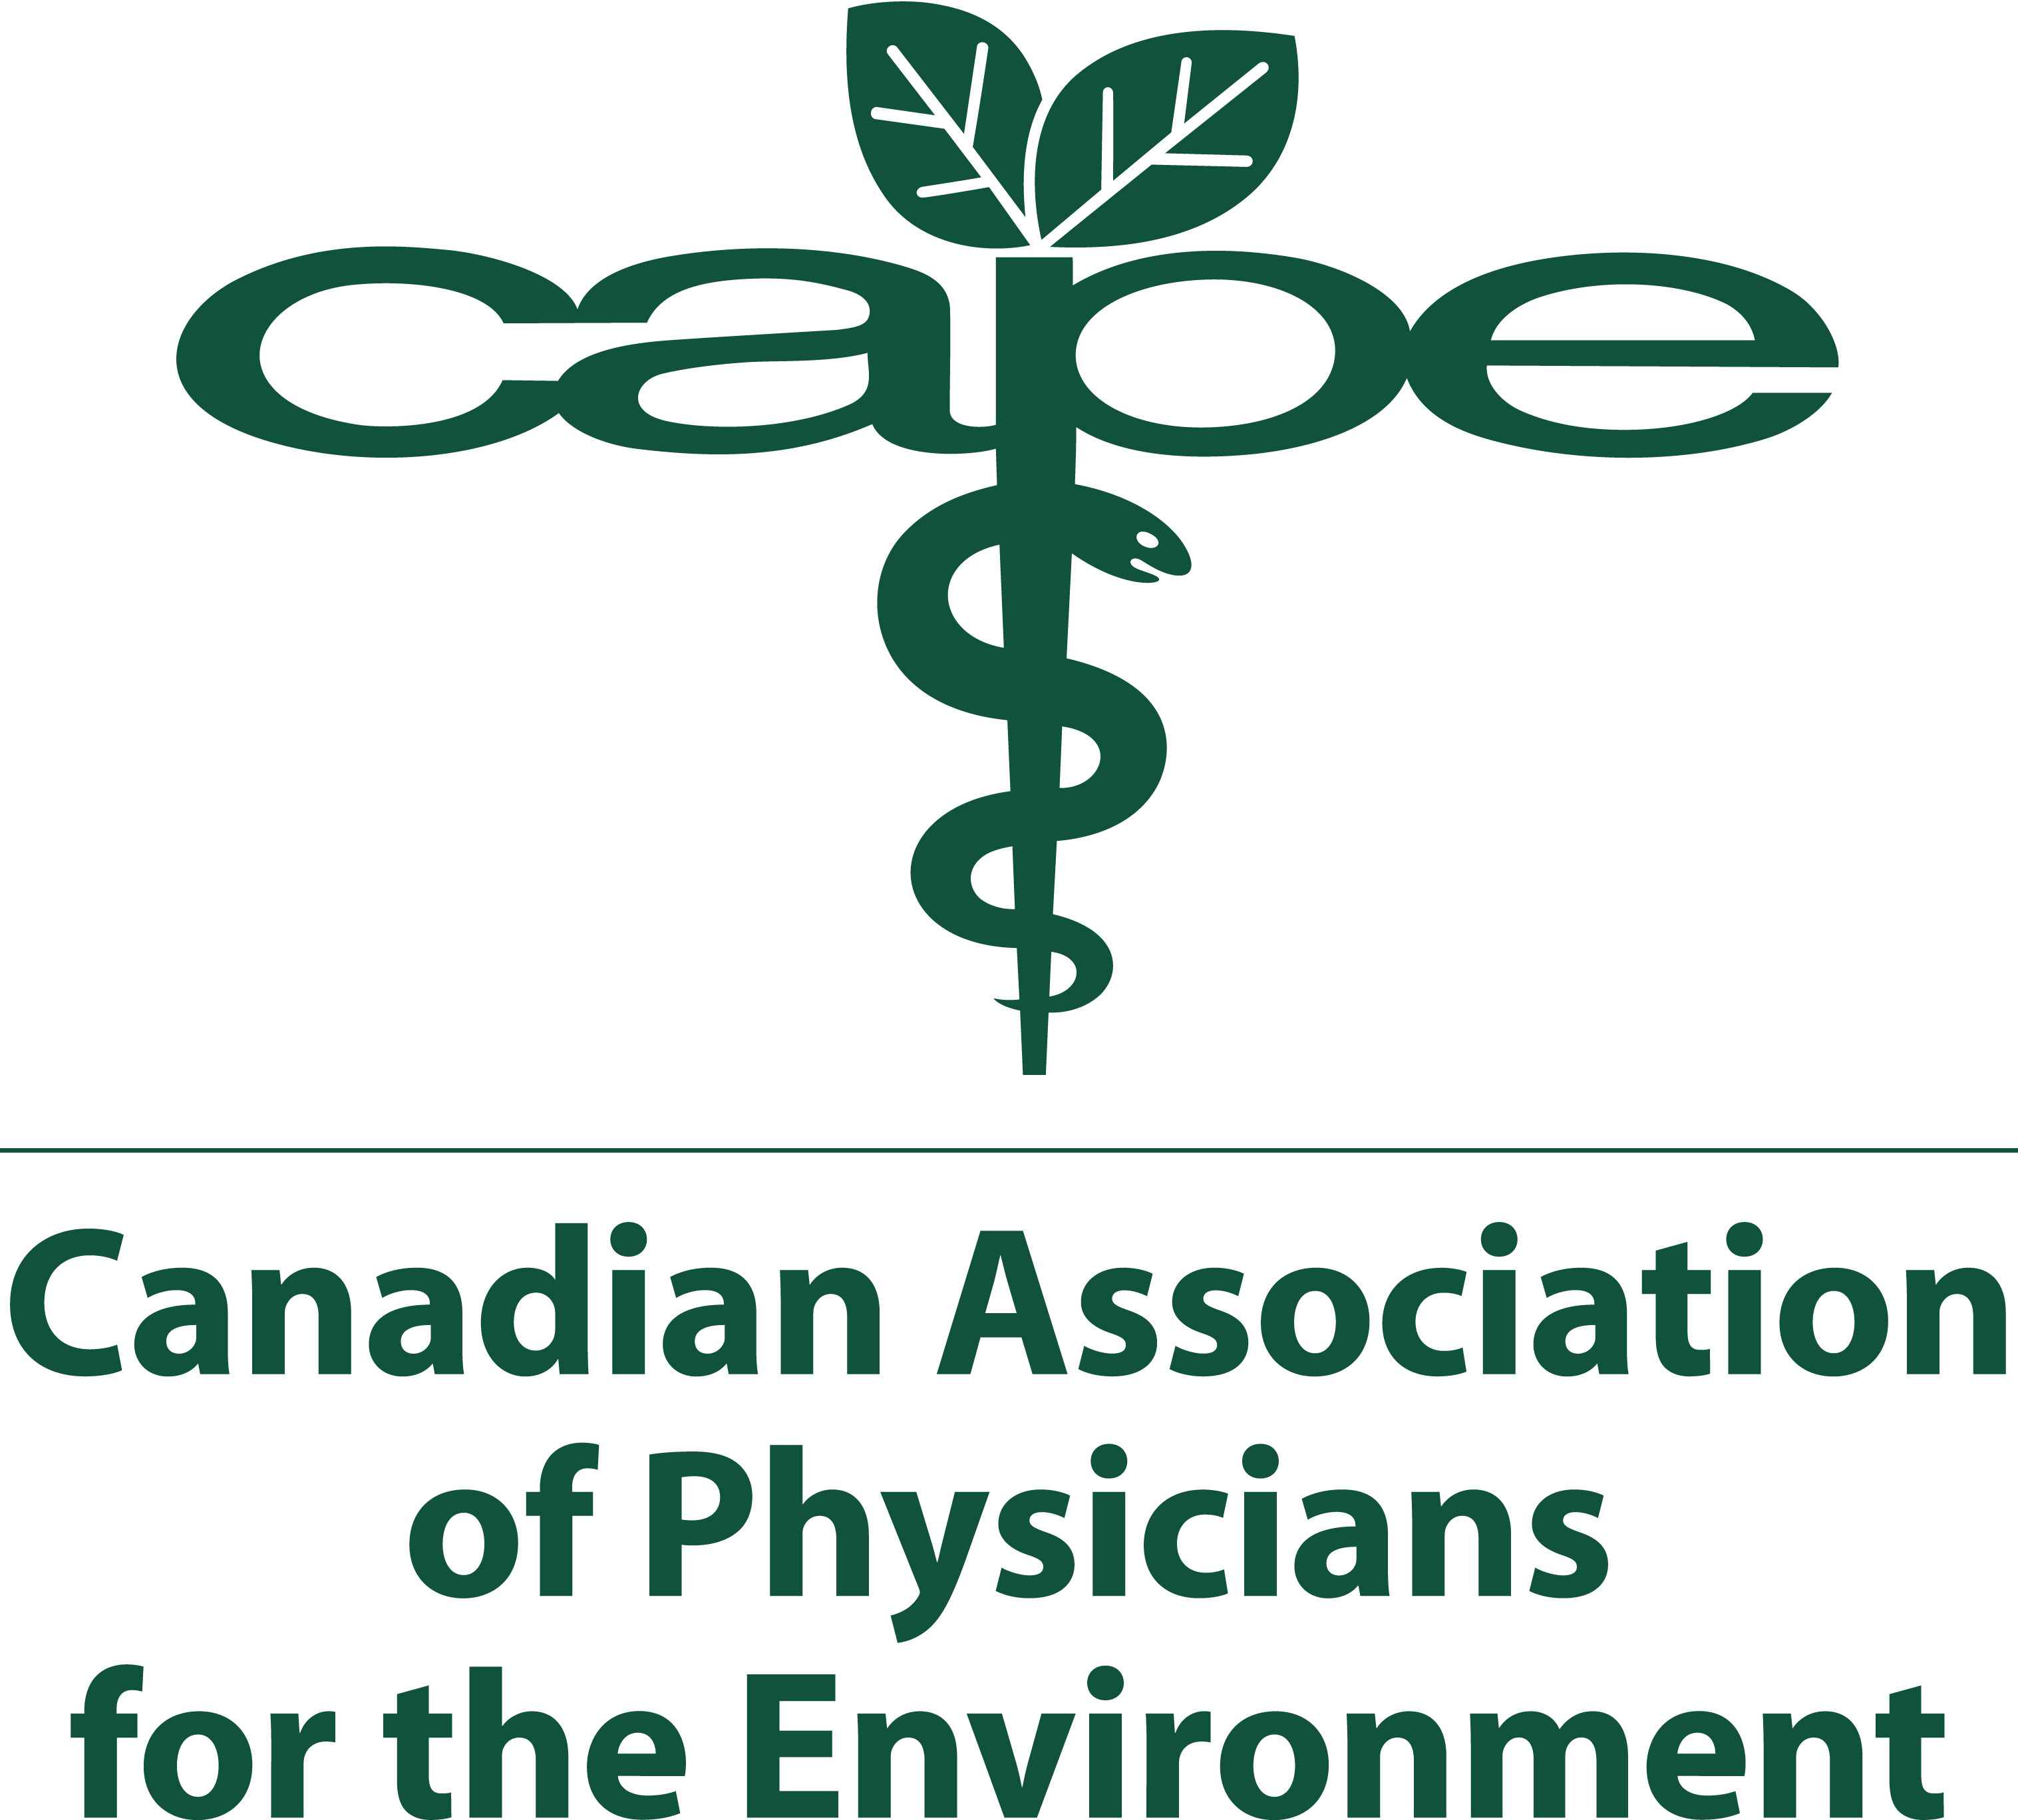 Canadian Association of Physicians for the Environment logo